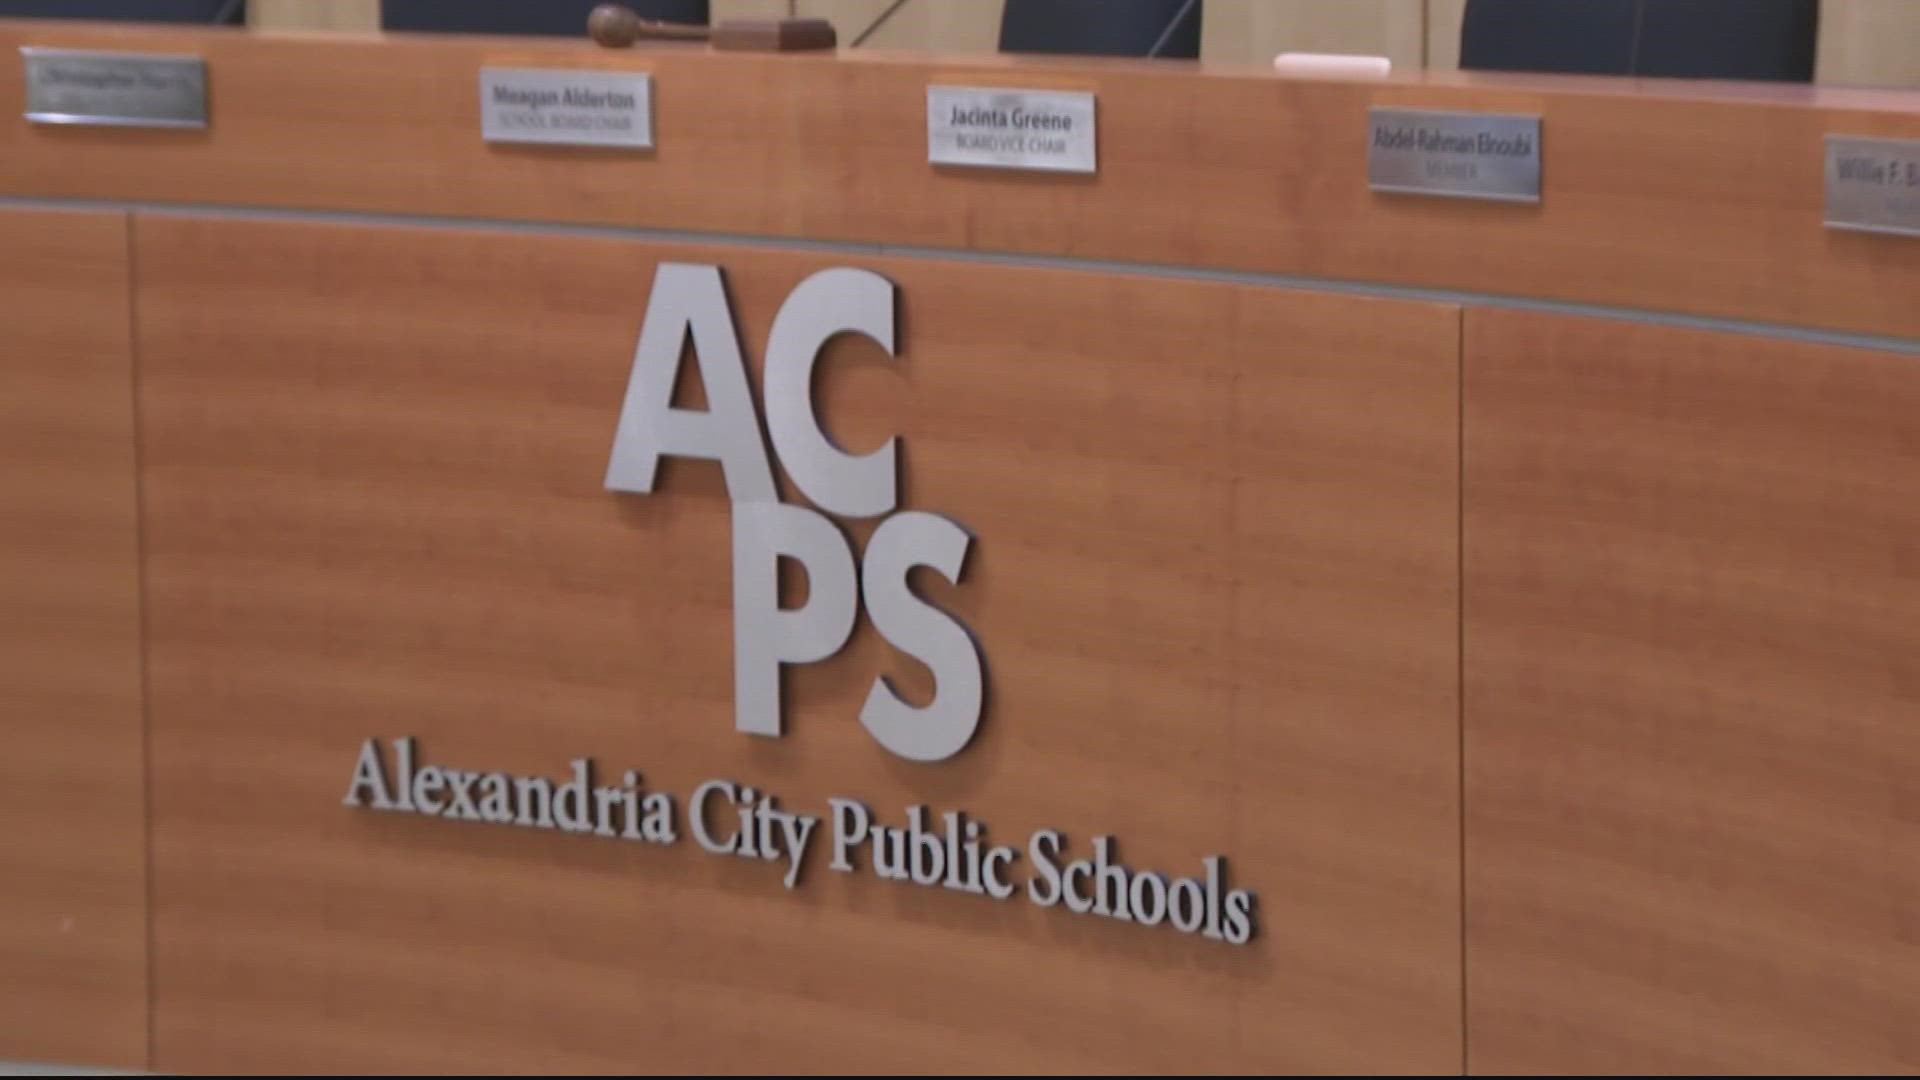 The Alexandria City School Board members will discuss the use of extending the school's resource officers and provide recommendations for next steps moving forward.